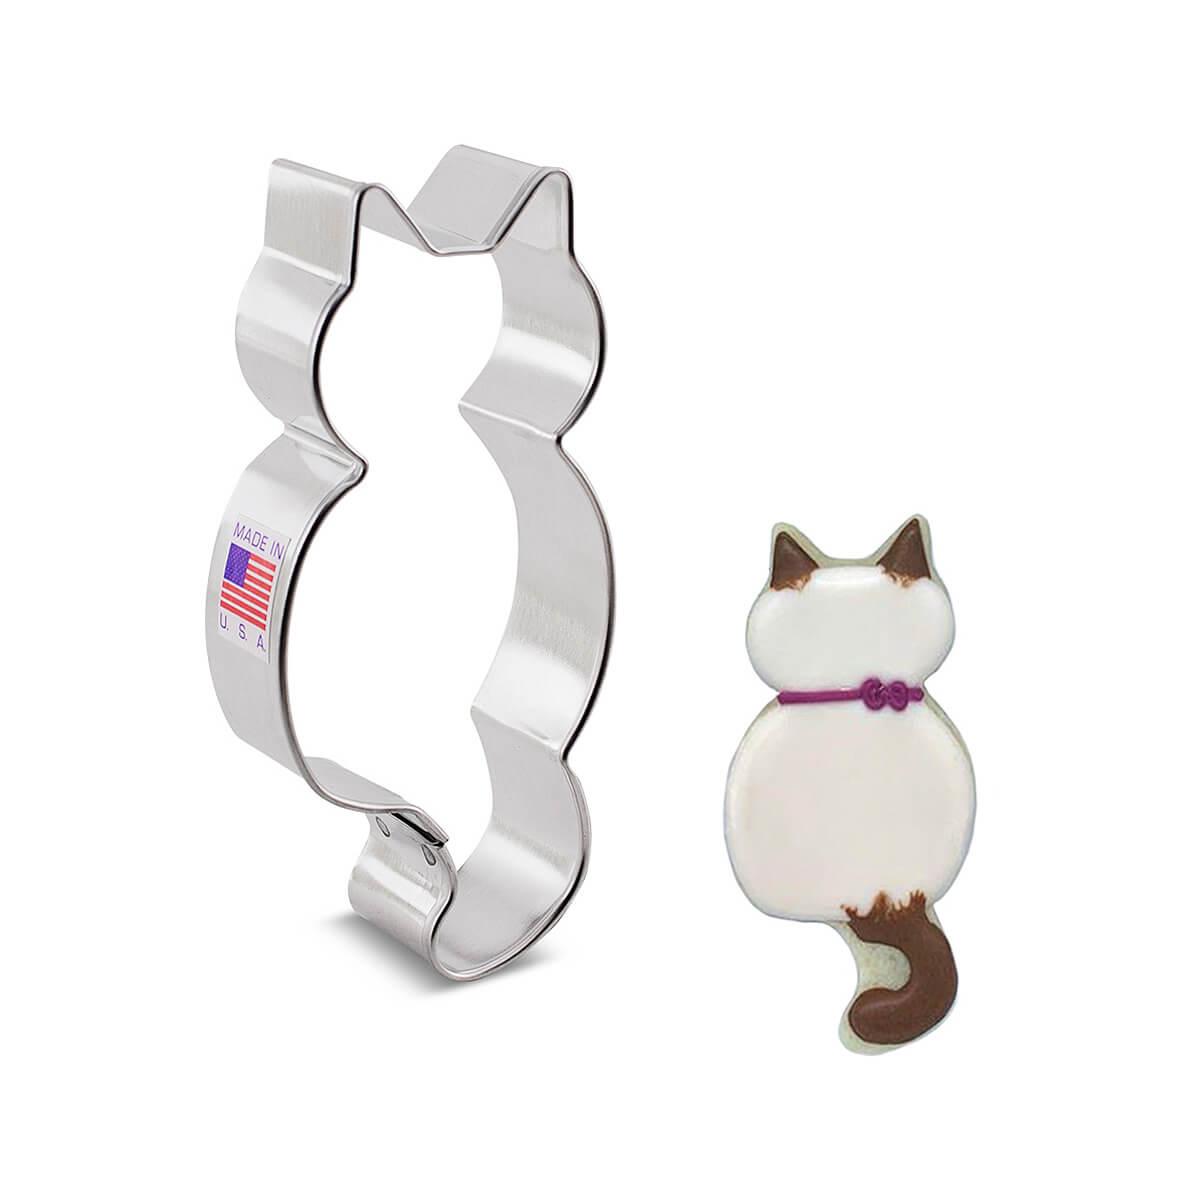  Kitty Cat Cookie Cutter